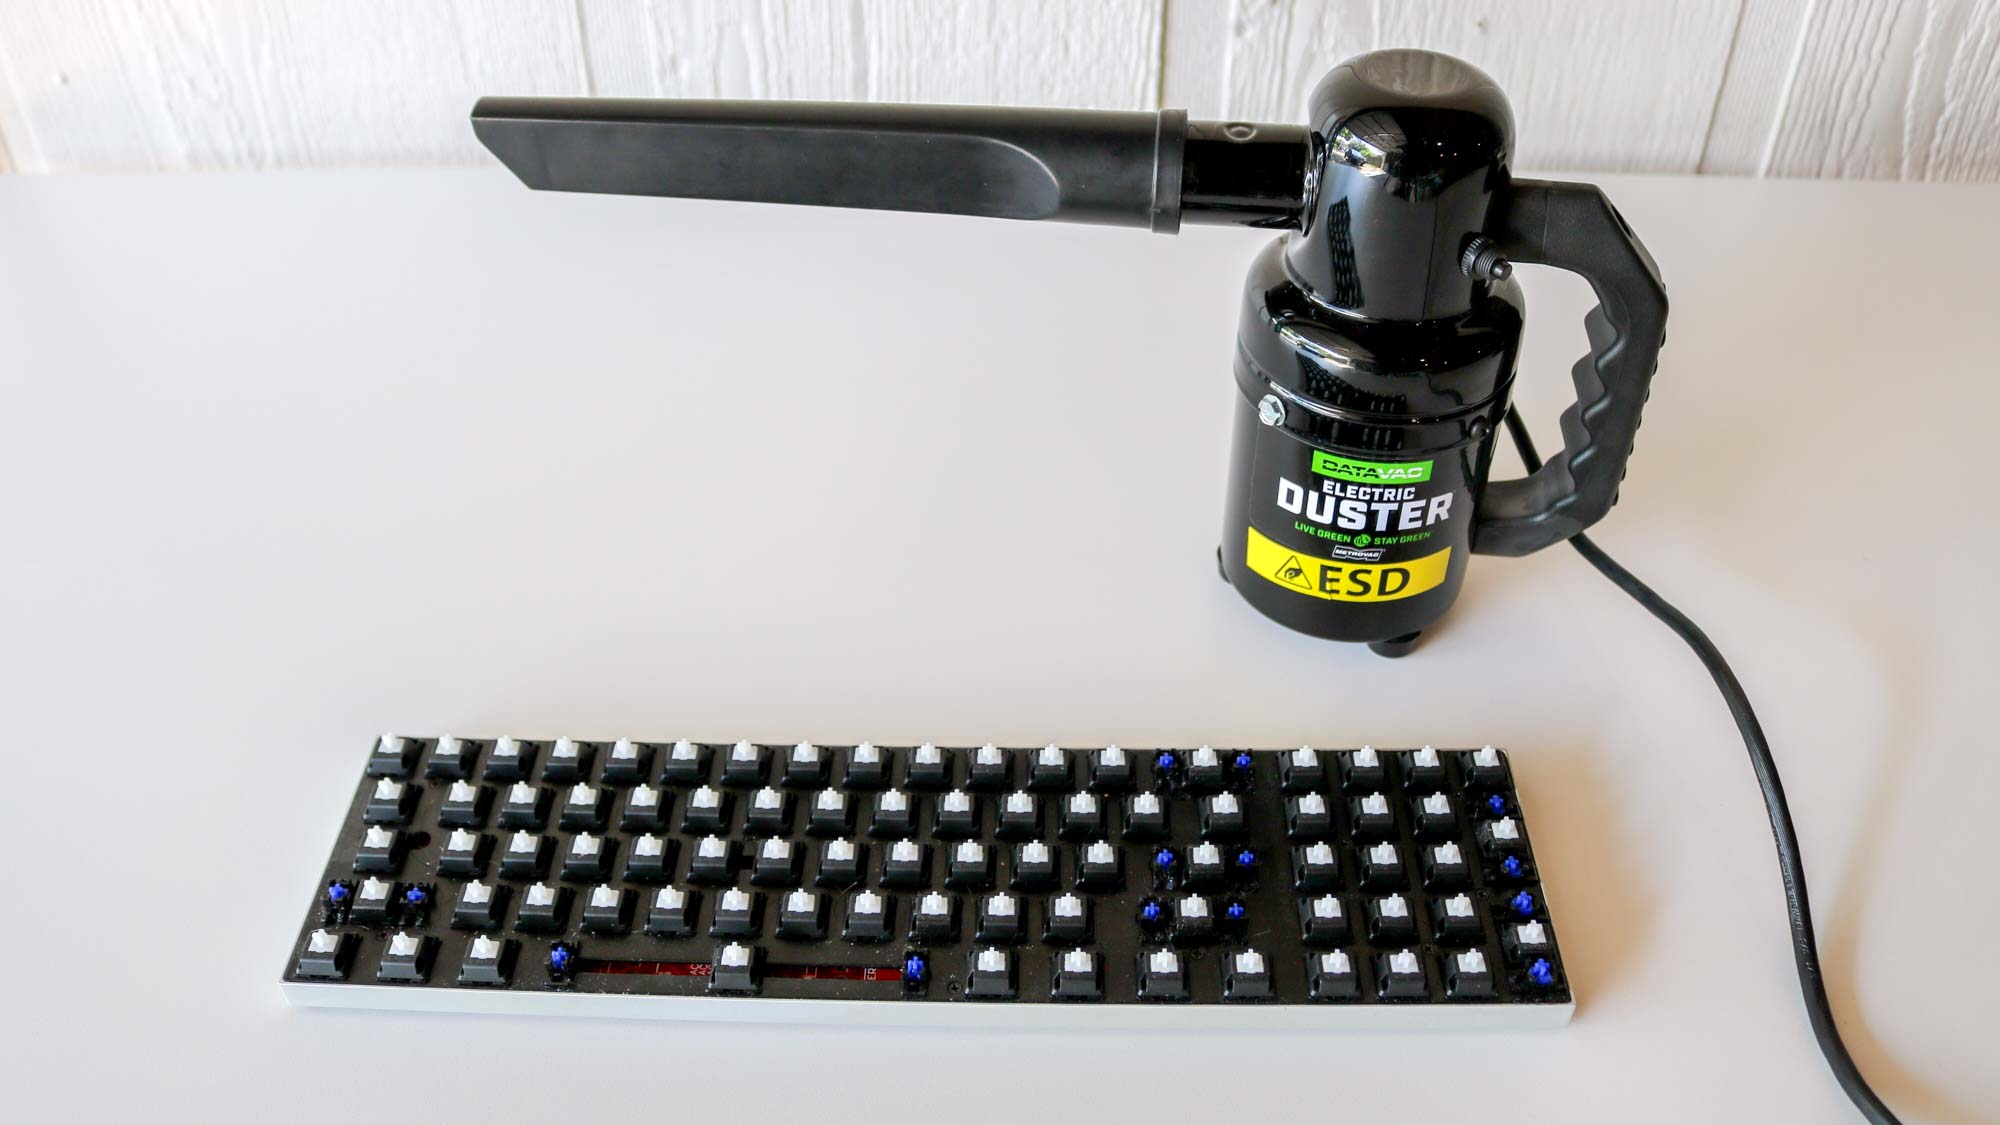 A keyboard with no keycaps next to an electric duster